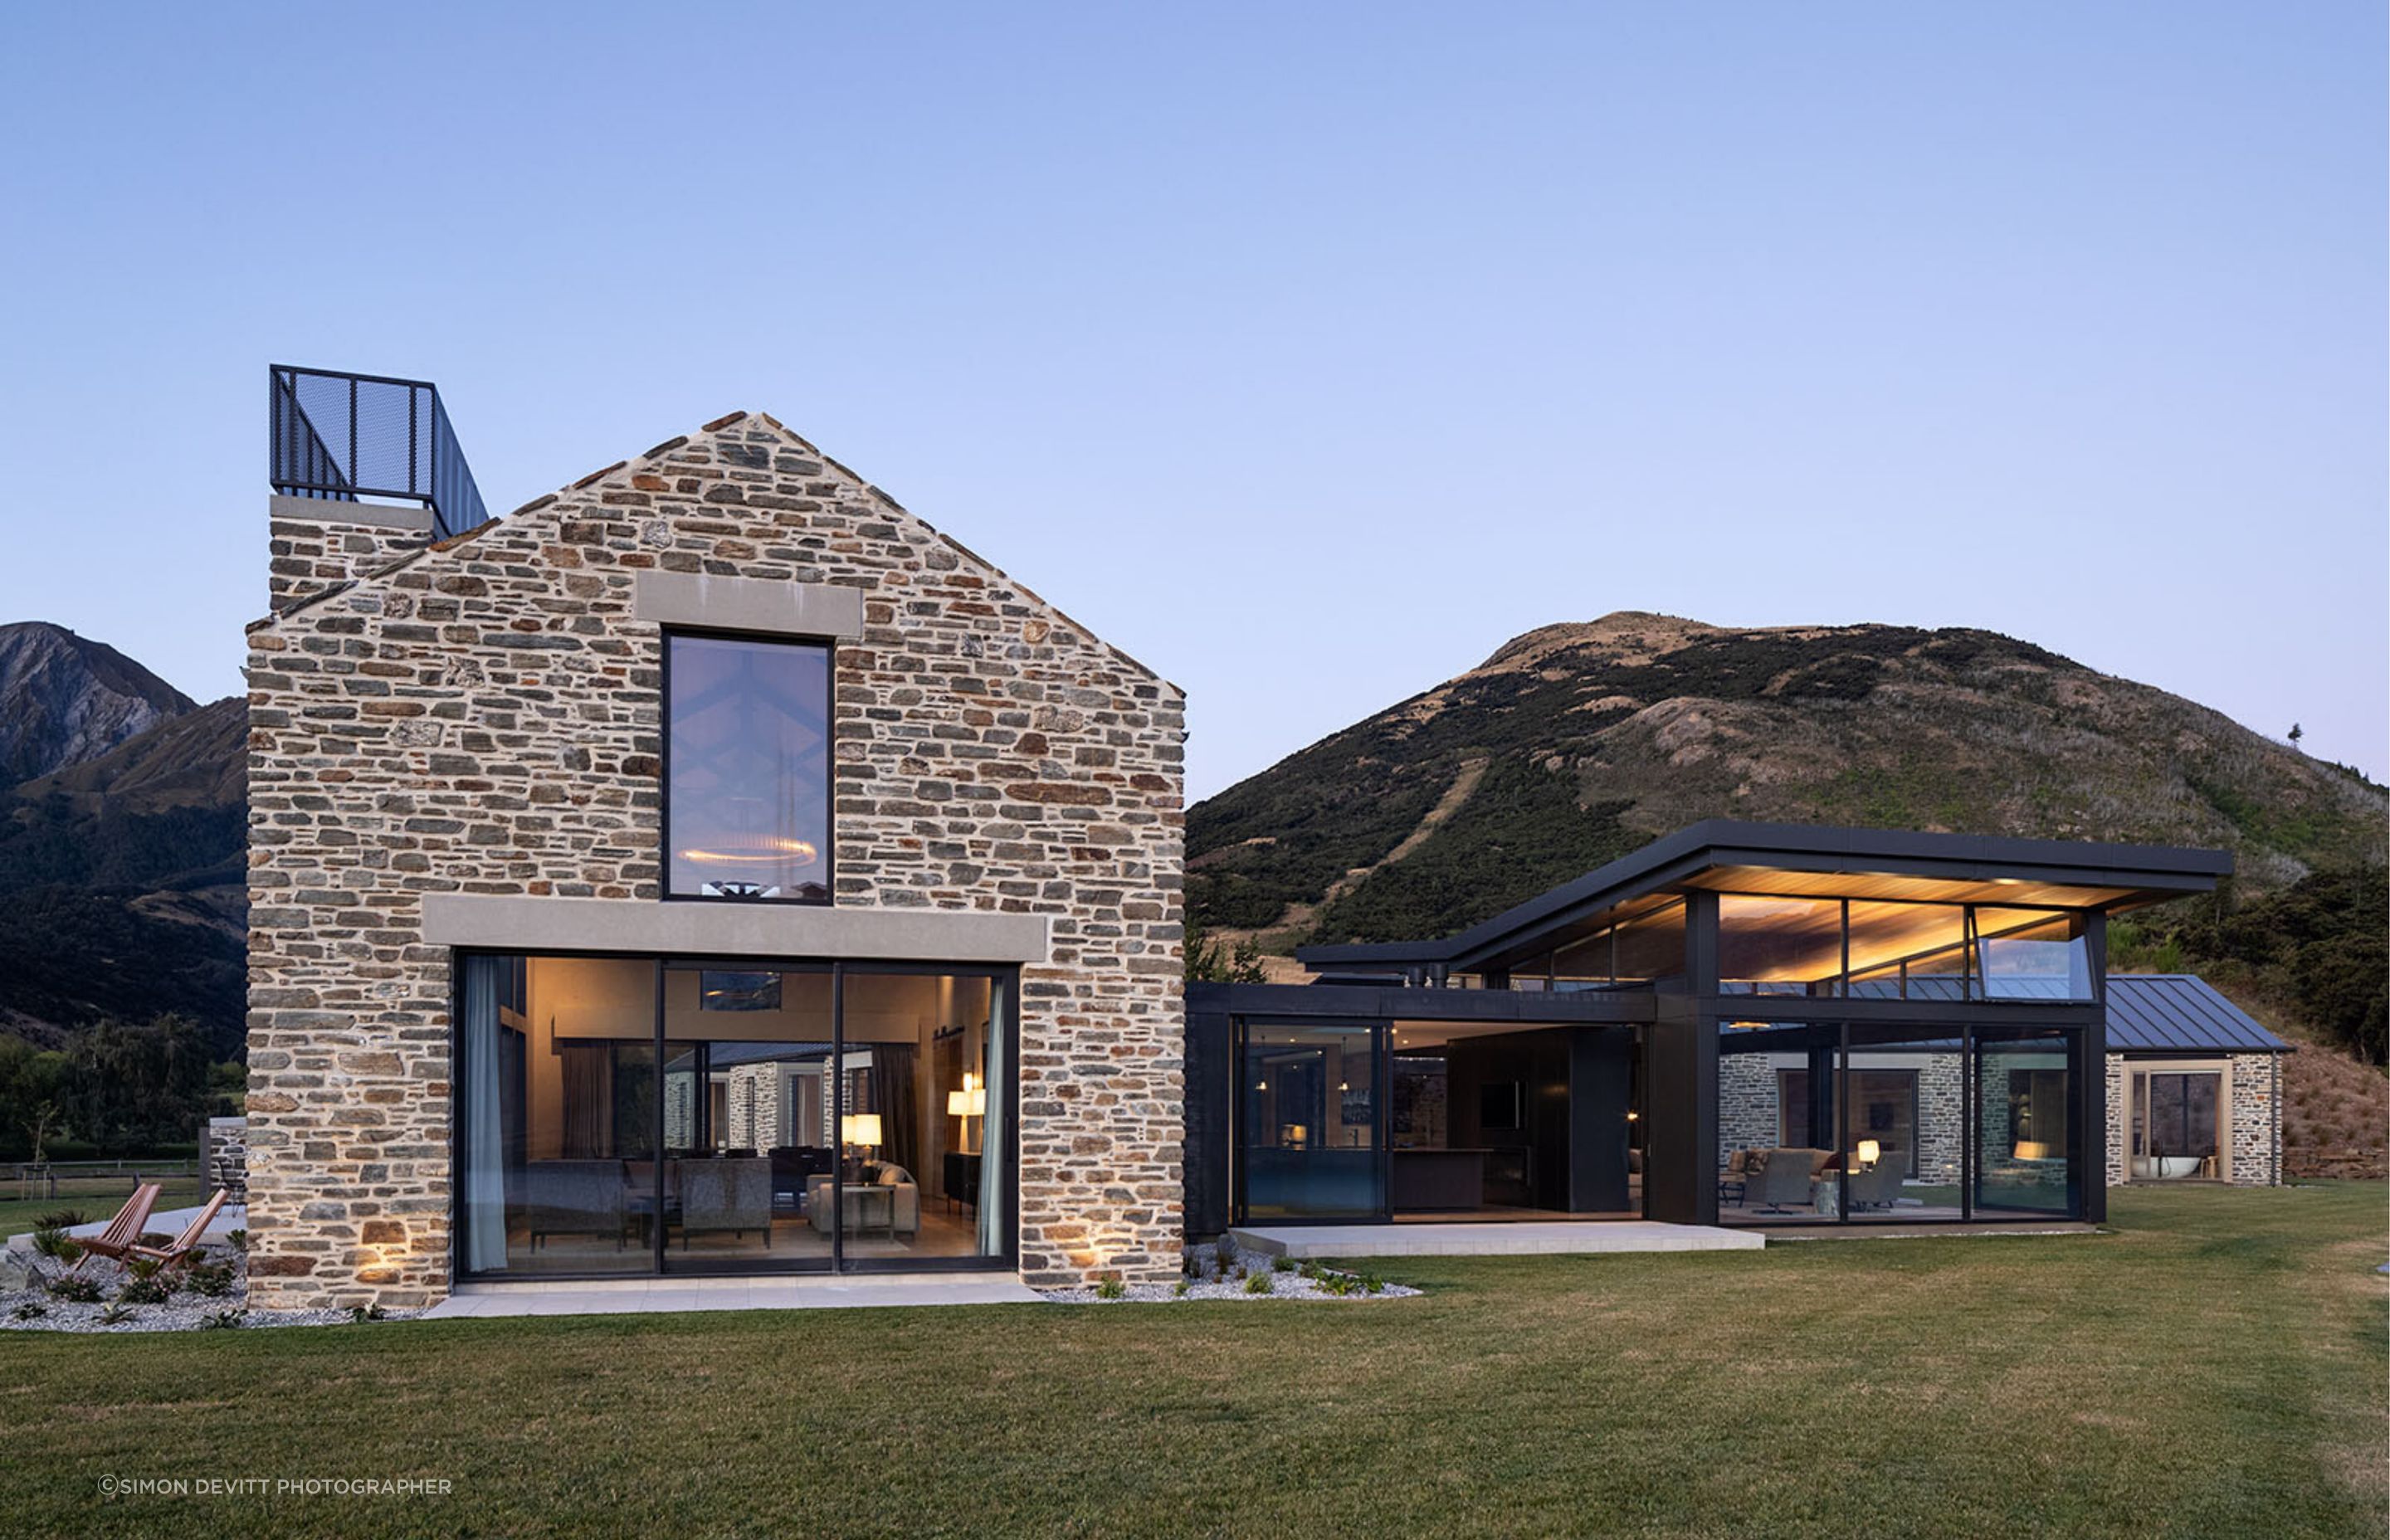 The holiday home's materiality echoes the vernacular of local schist cottages.